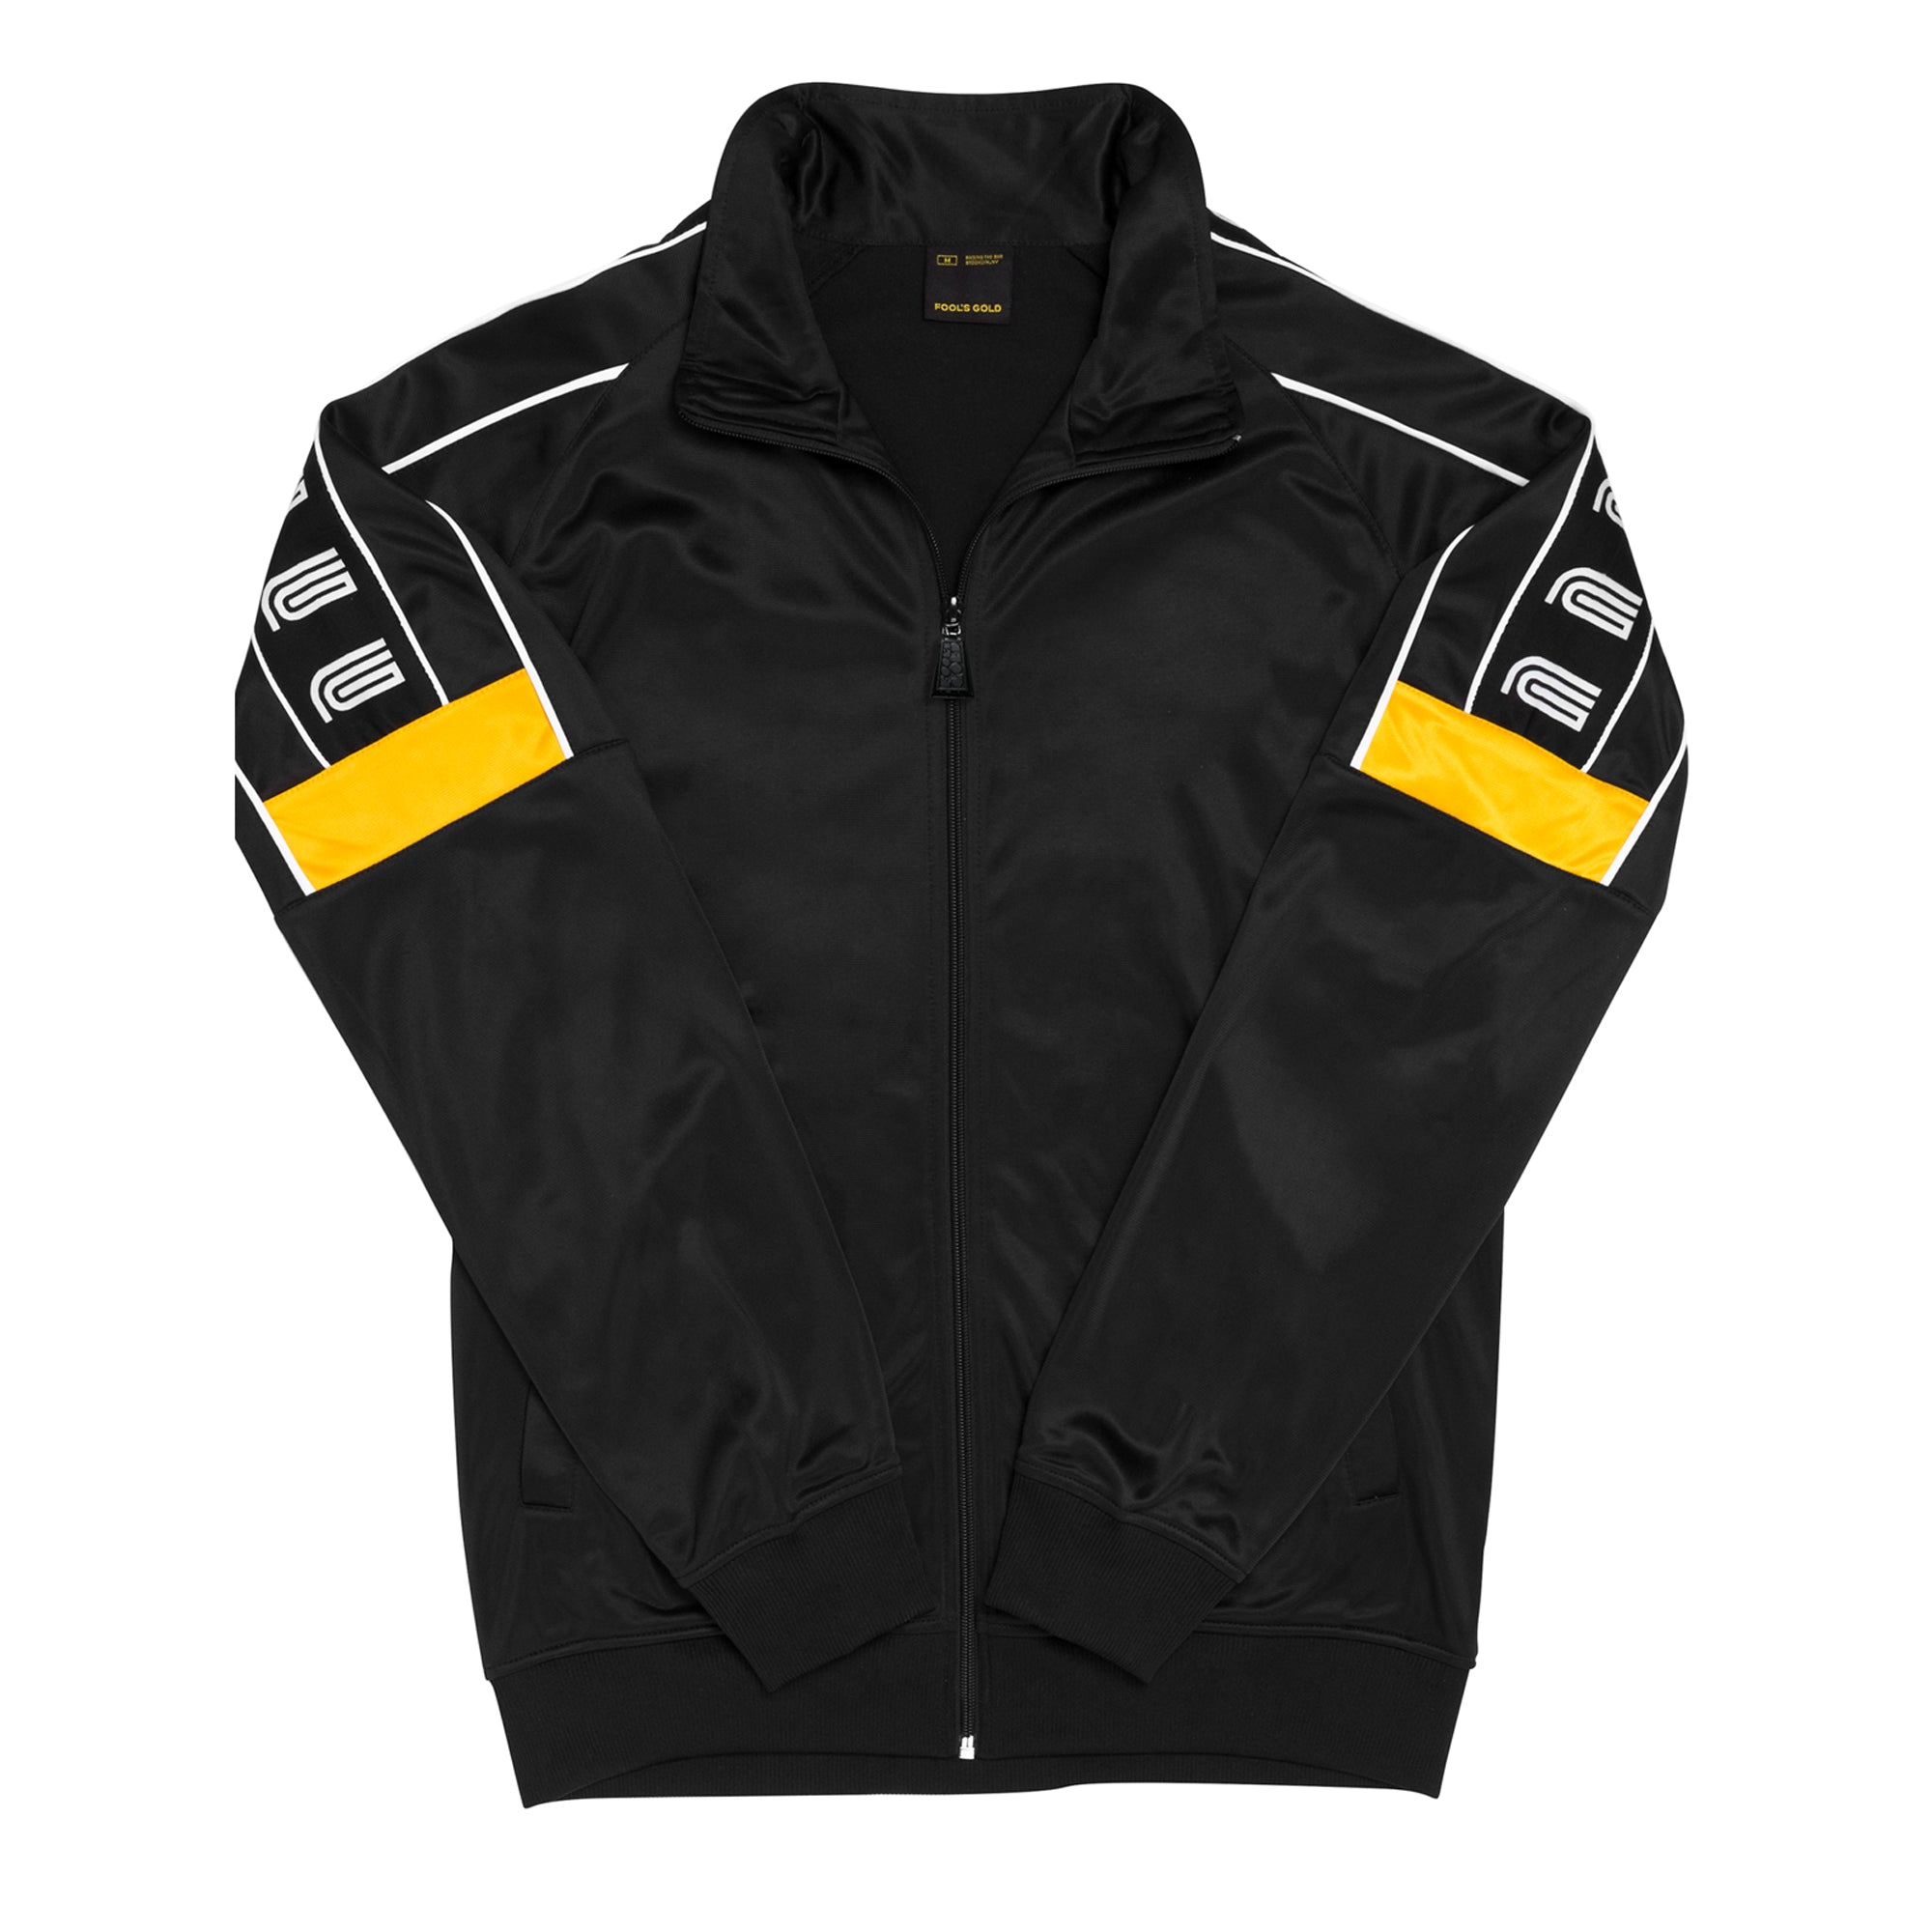 Fool’s Gold “808” Tracksuit - Jacket